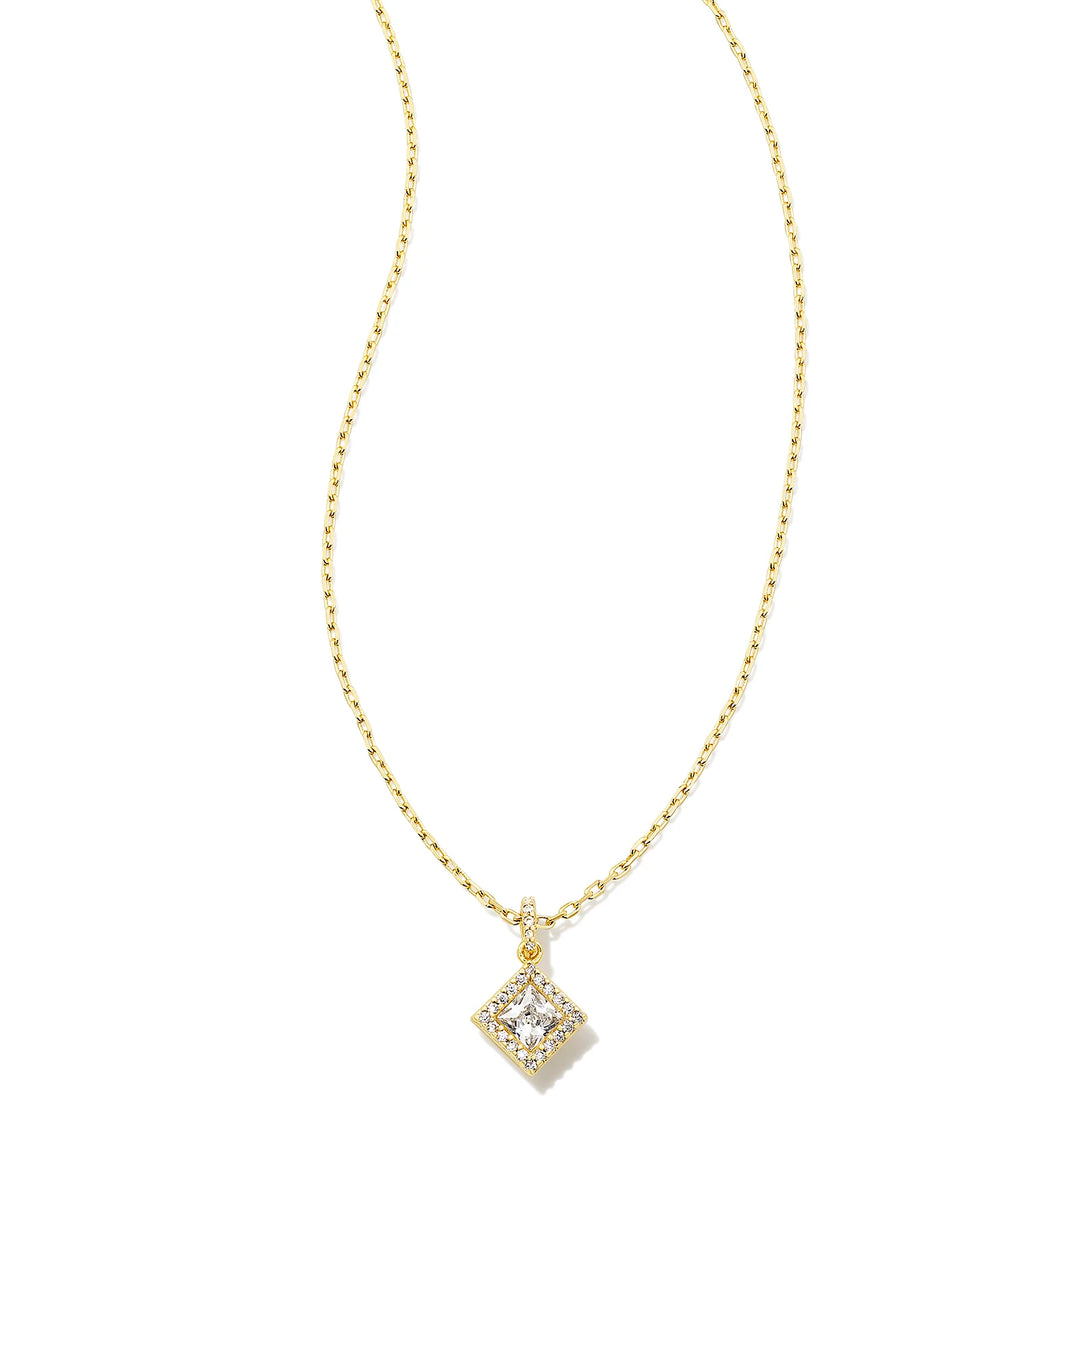 Kendra Scott Gracie Gold Short Pendant Necklace in White Crystal